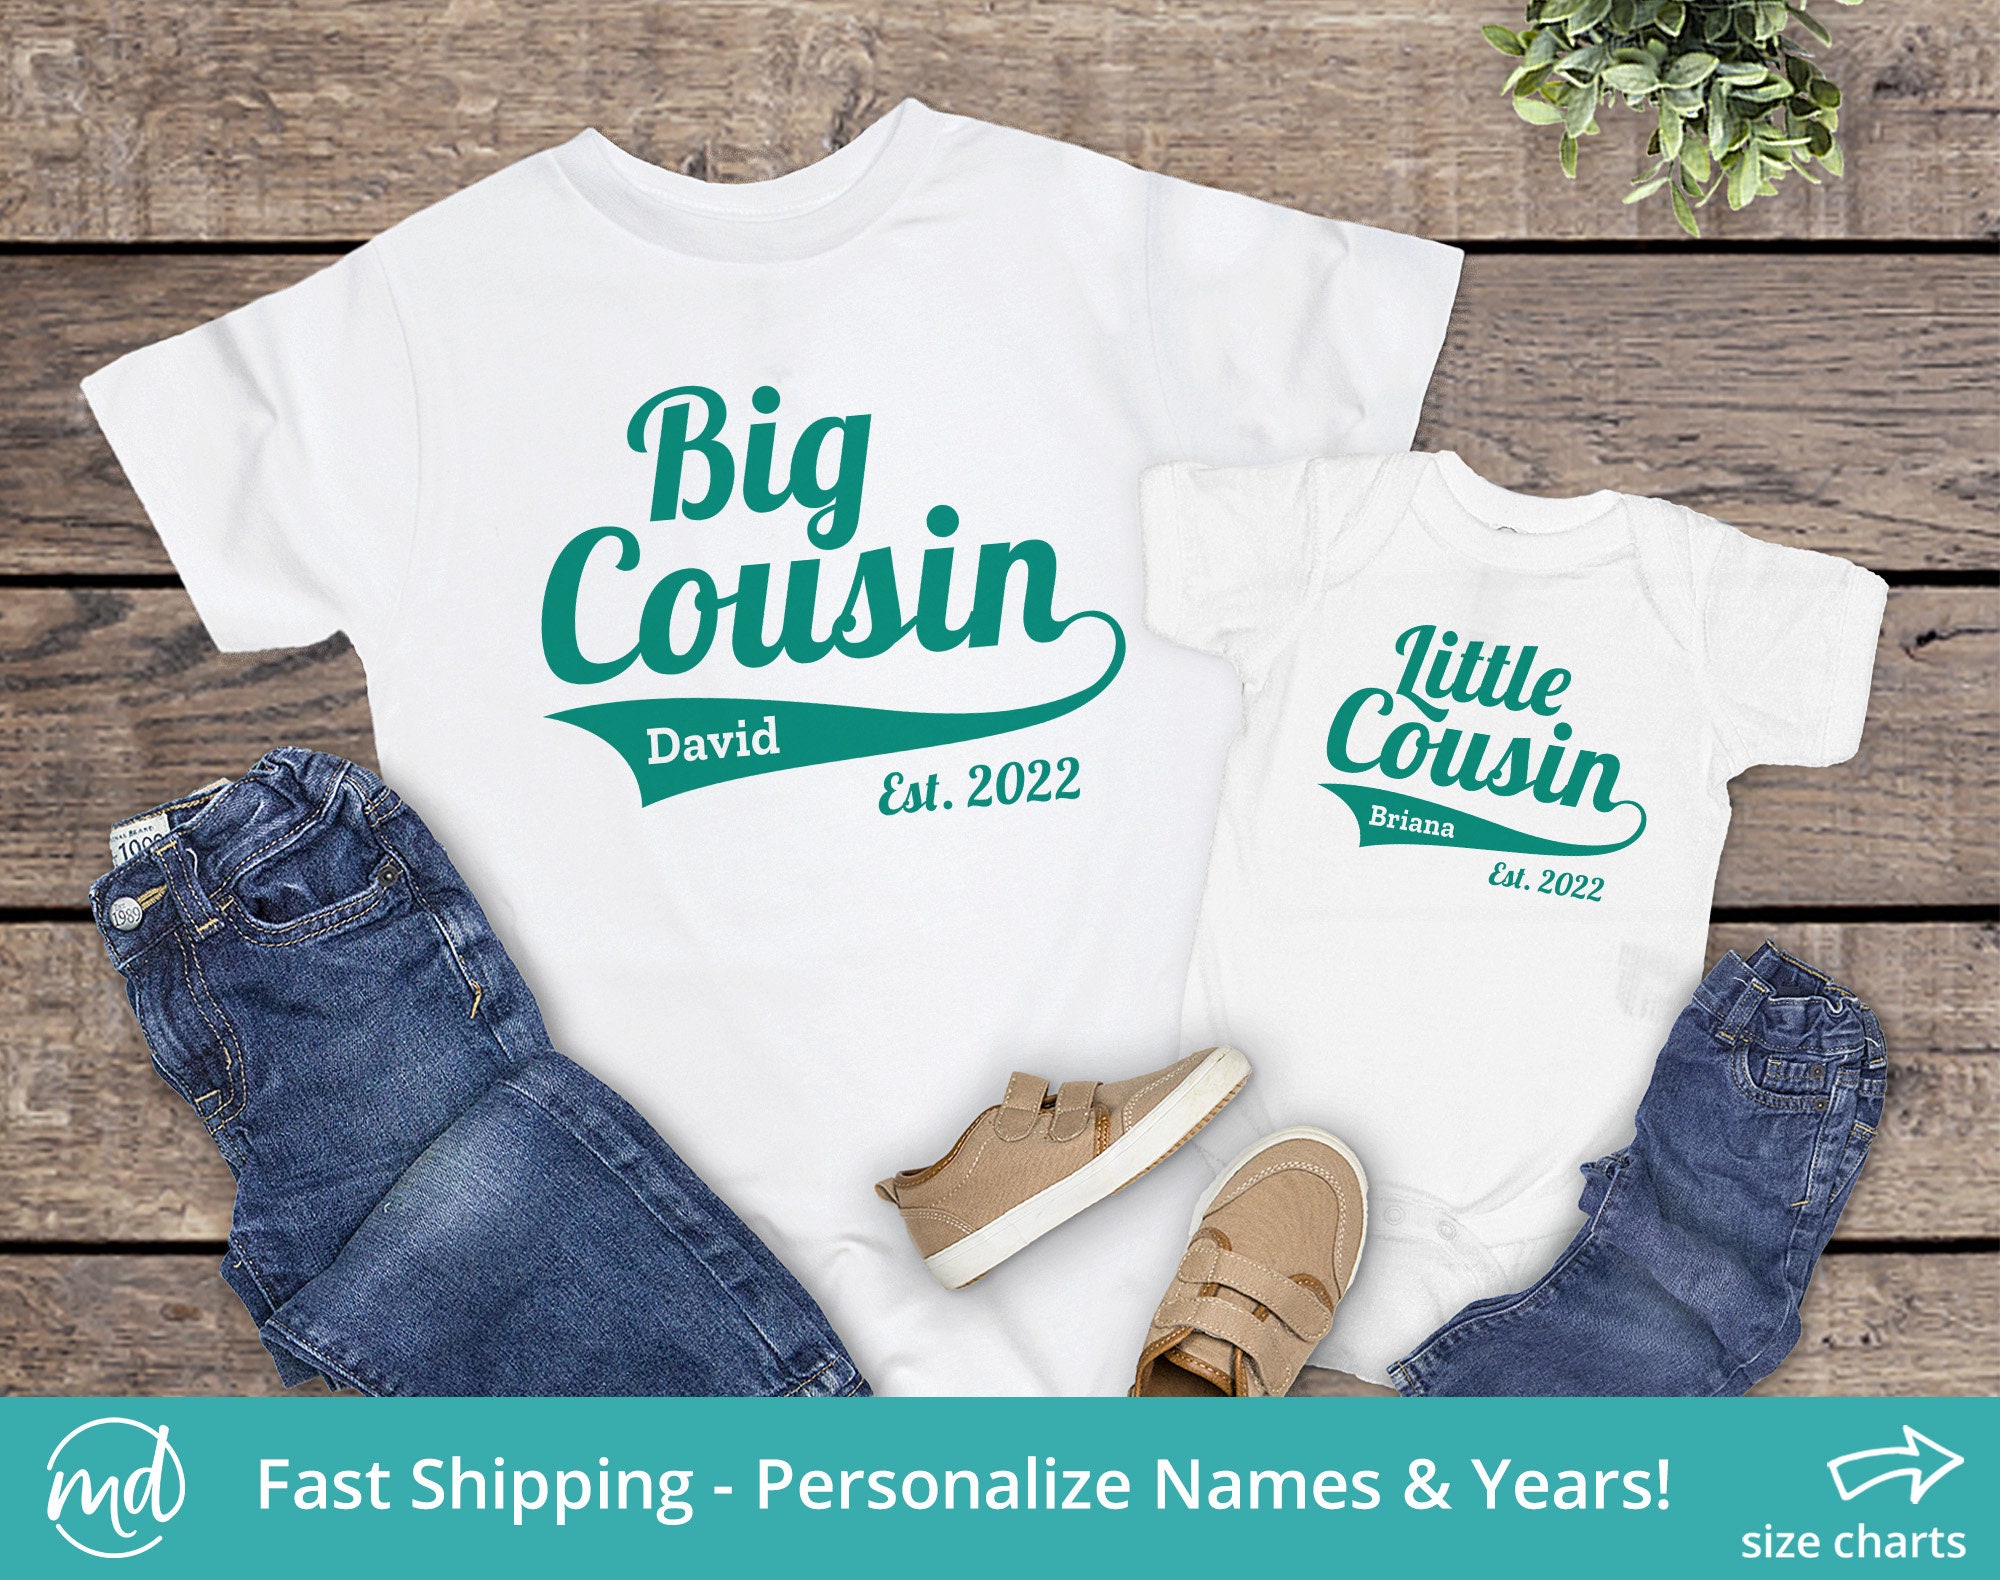 2. How Personalized Fishing T-Shirts Can Strengthen Cousin Bonds